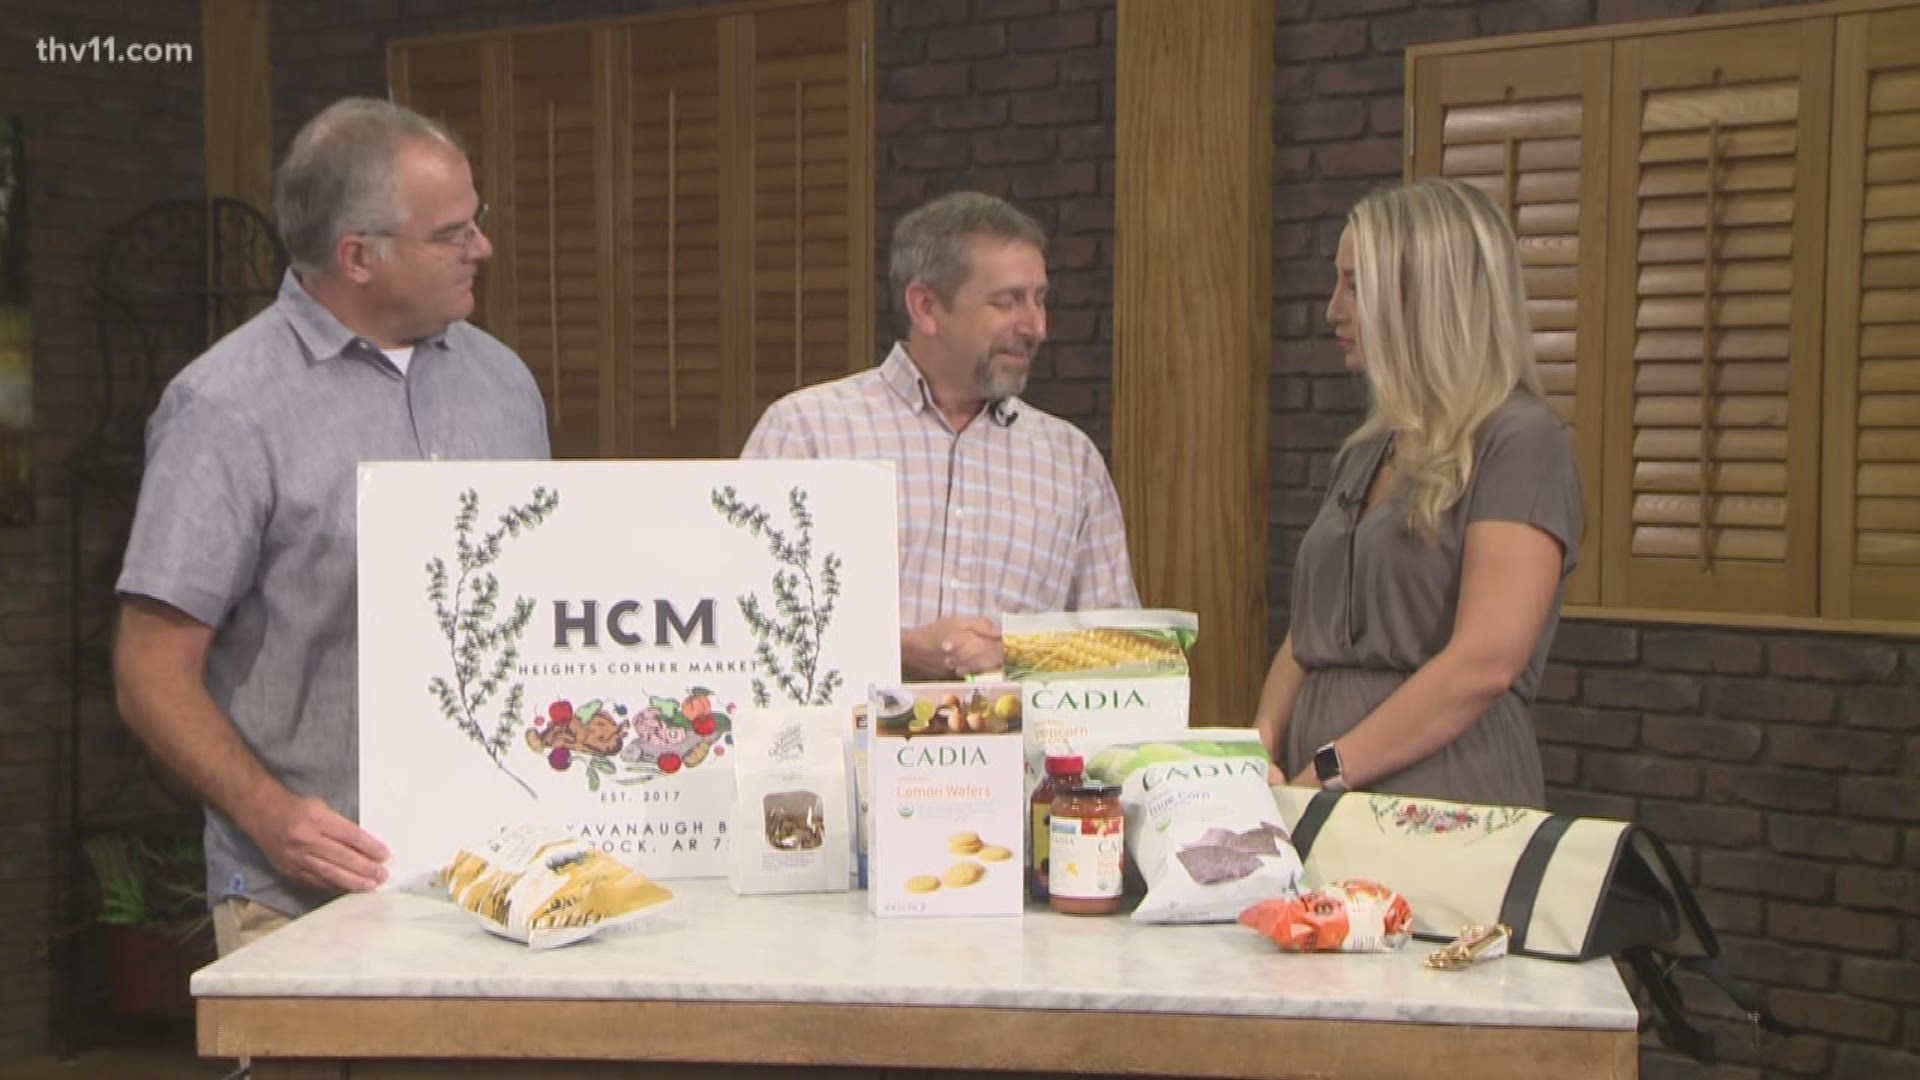 It's National Junk Food Day, but junk food doesn't always have to be unhealthy. Our friends from Heights Corner Market are here with some options.